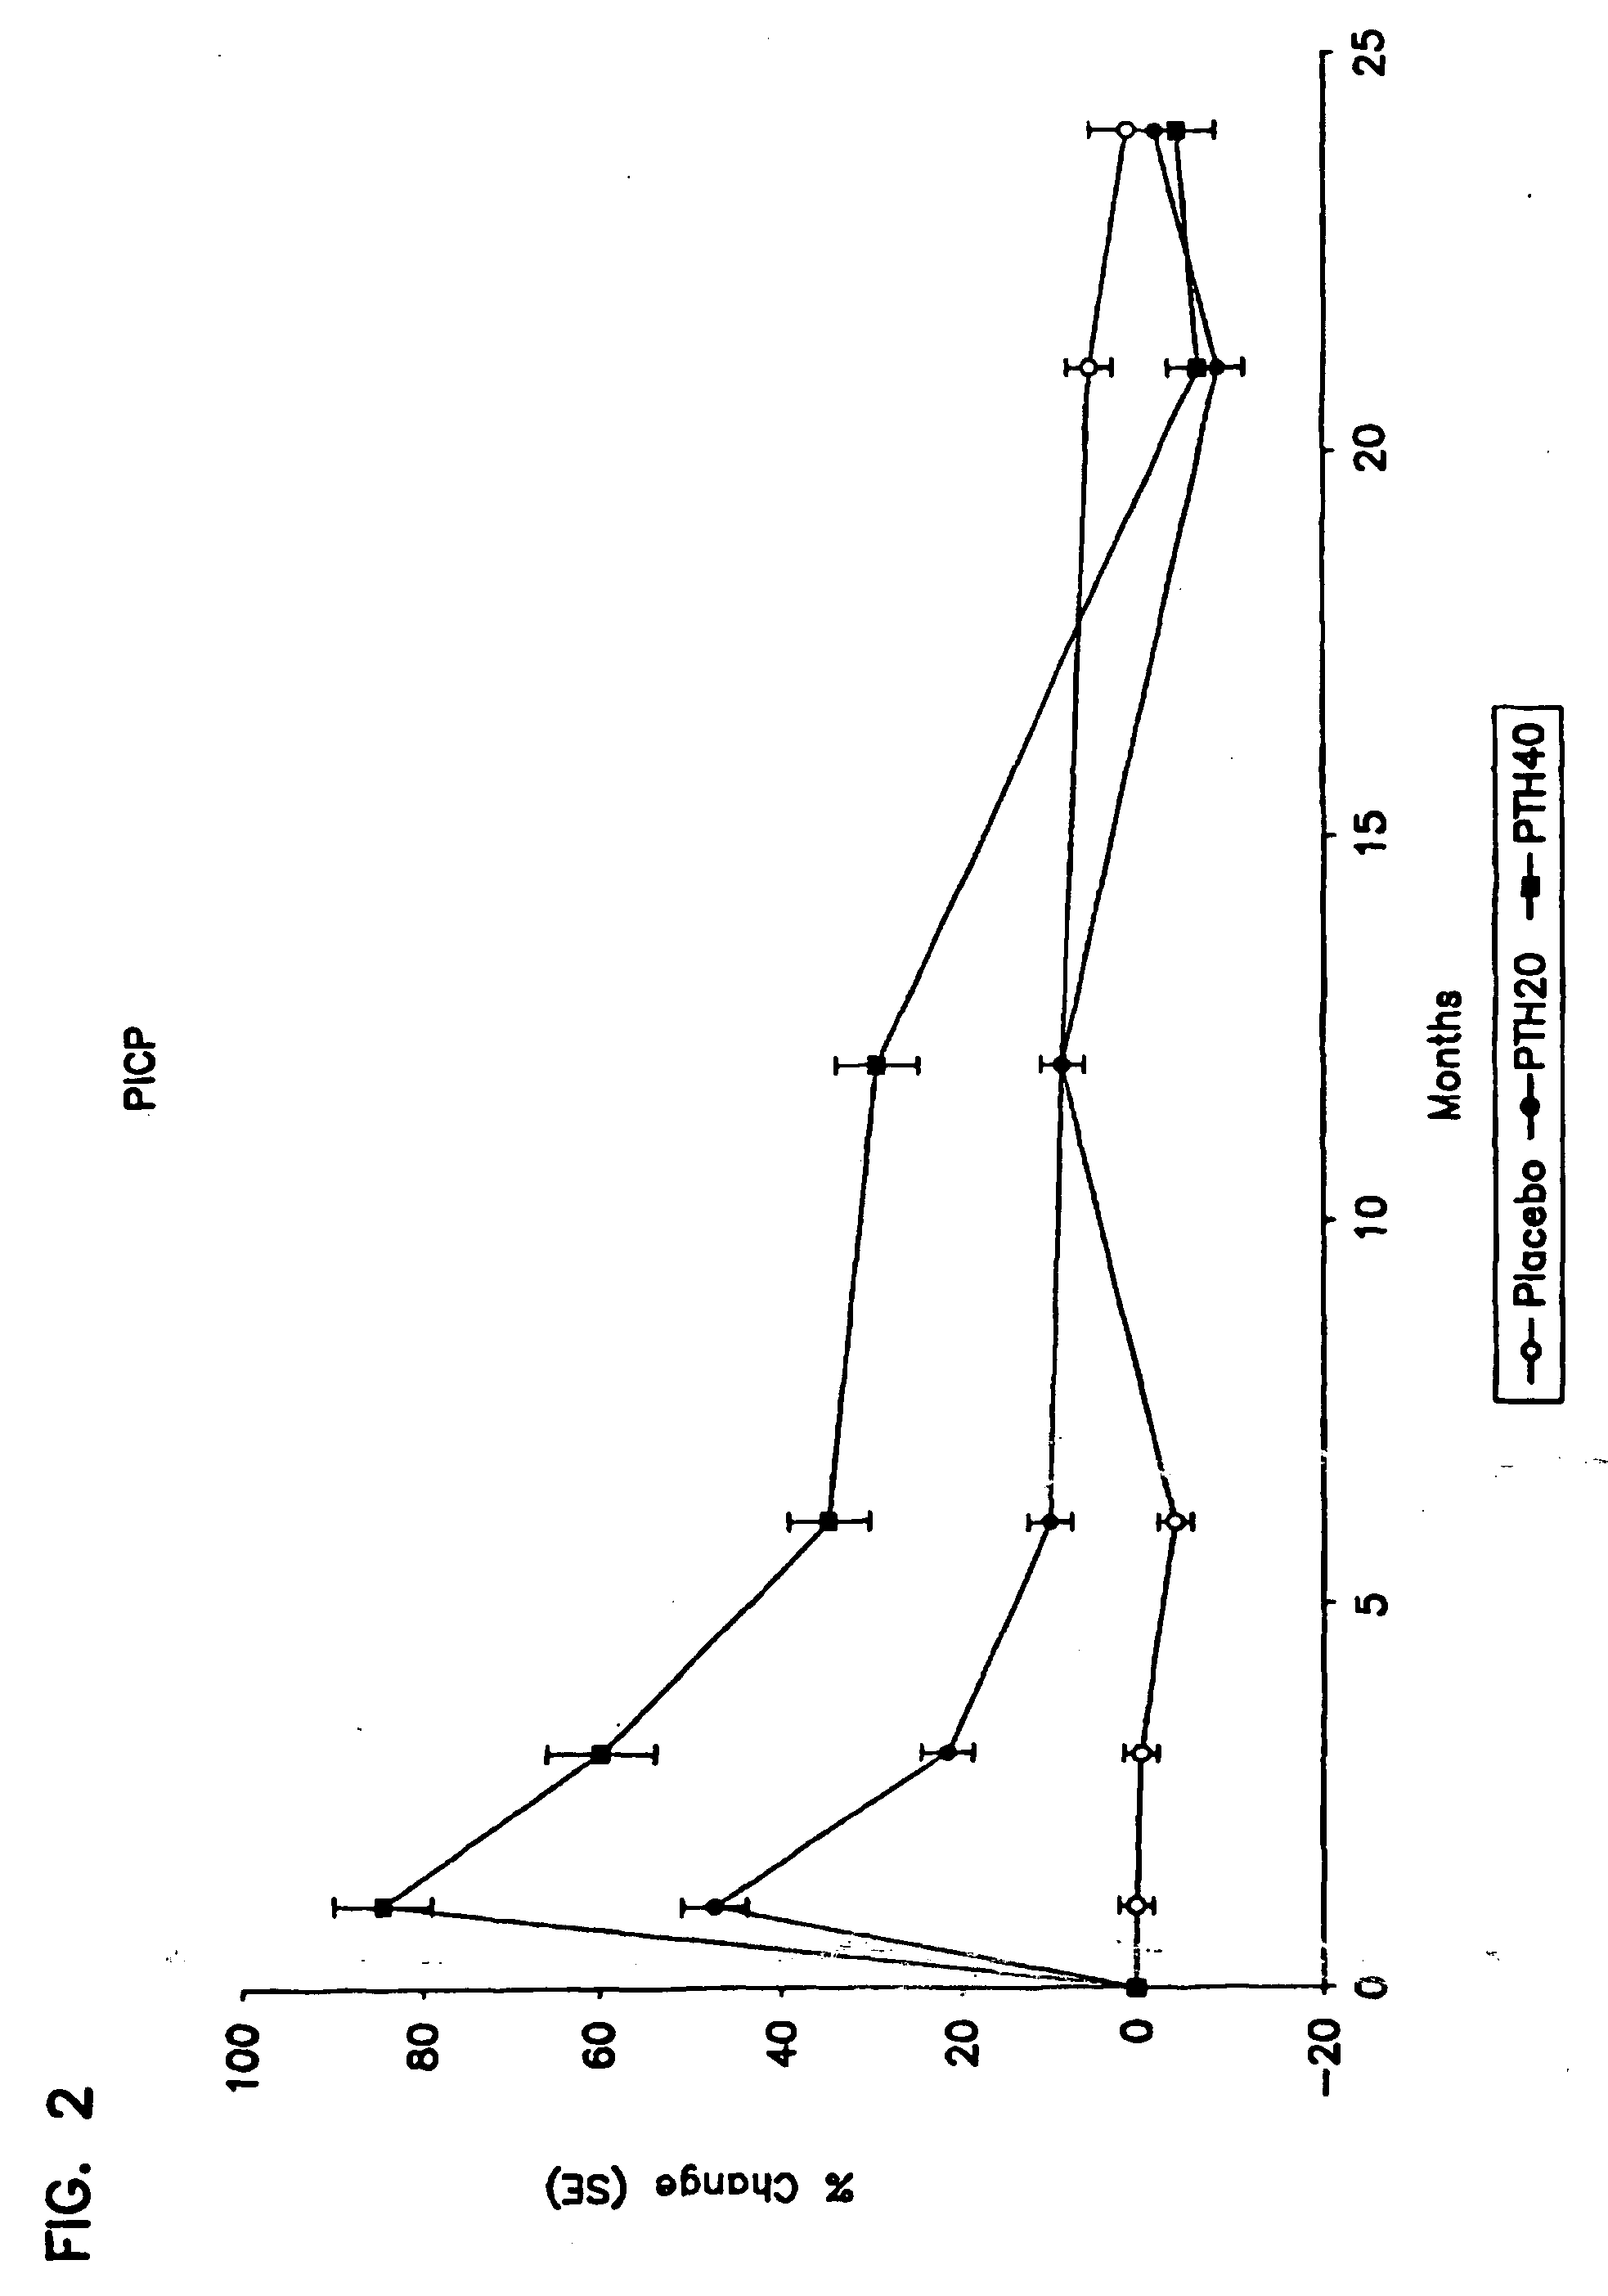 Method for monitoring treatment with a parathyroid hormone